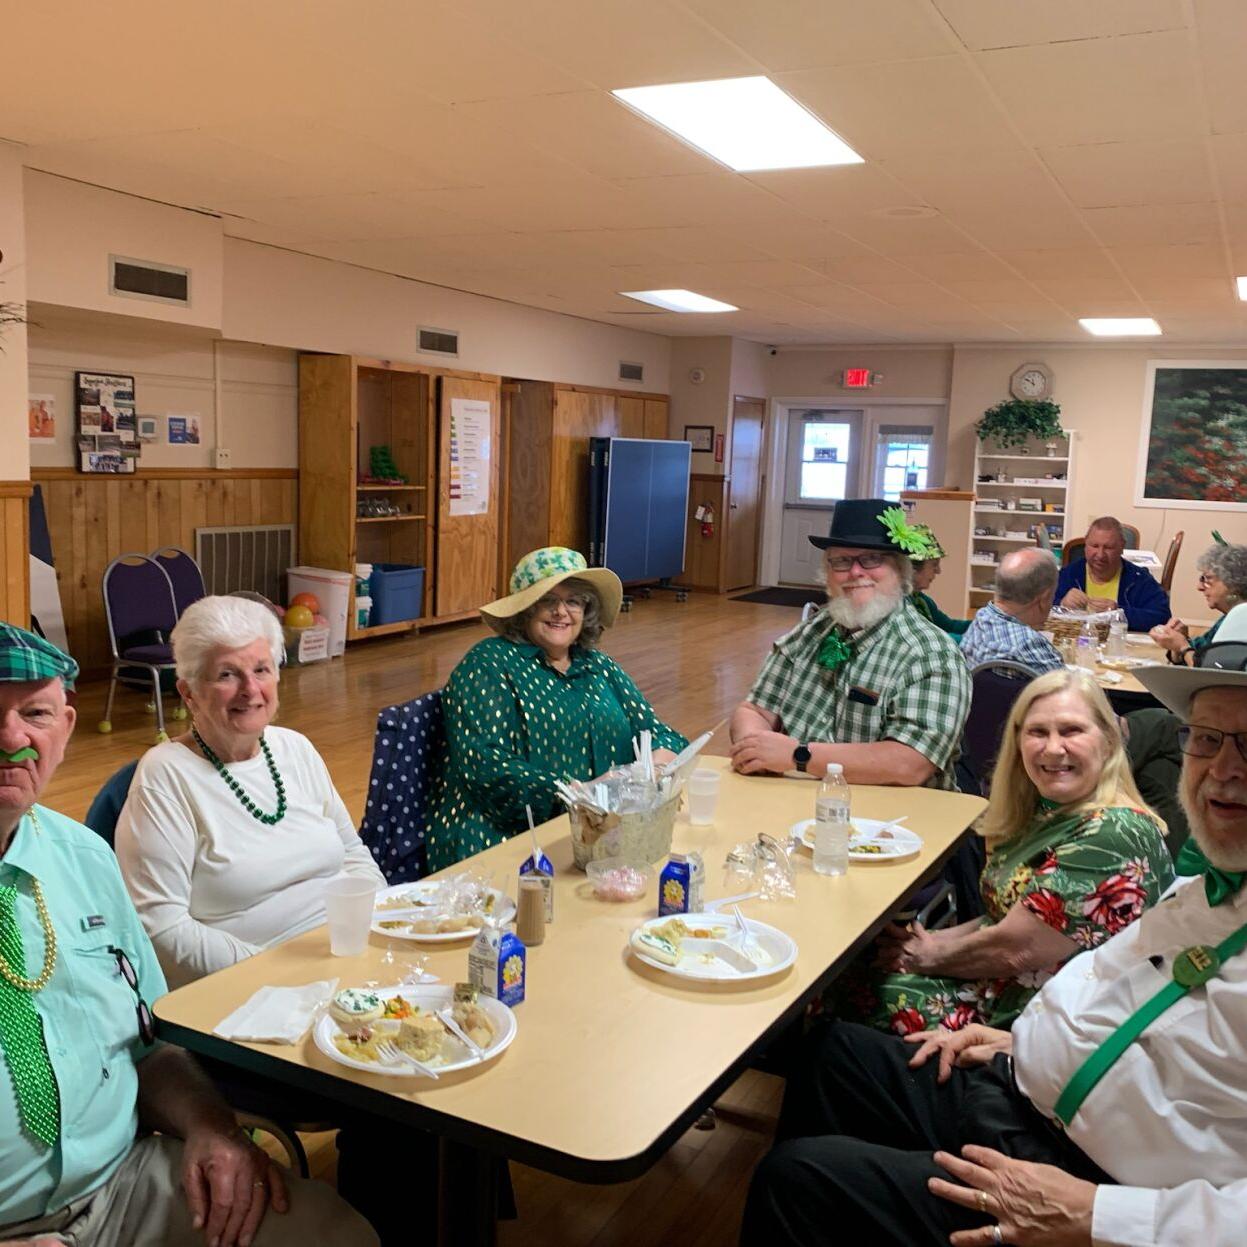 Who Put the Luck into St. Patrick's Day? - Fellowship Senior Living